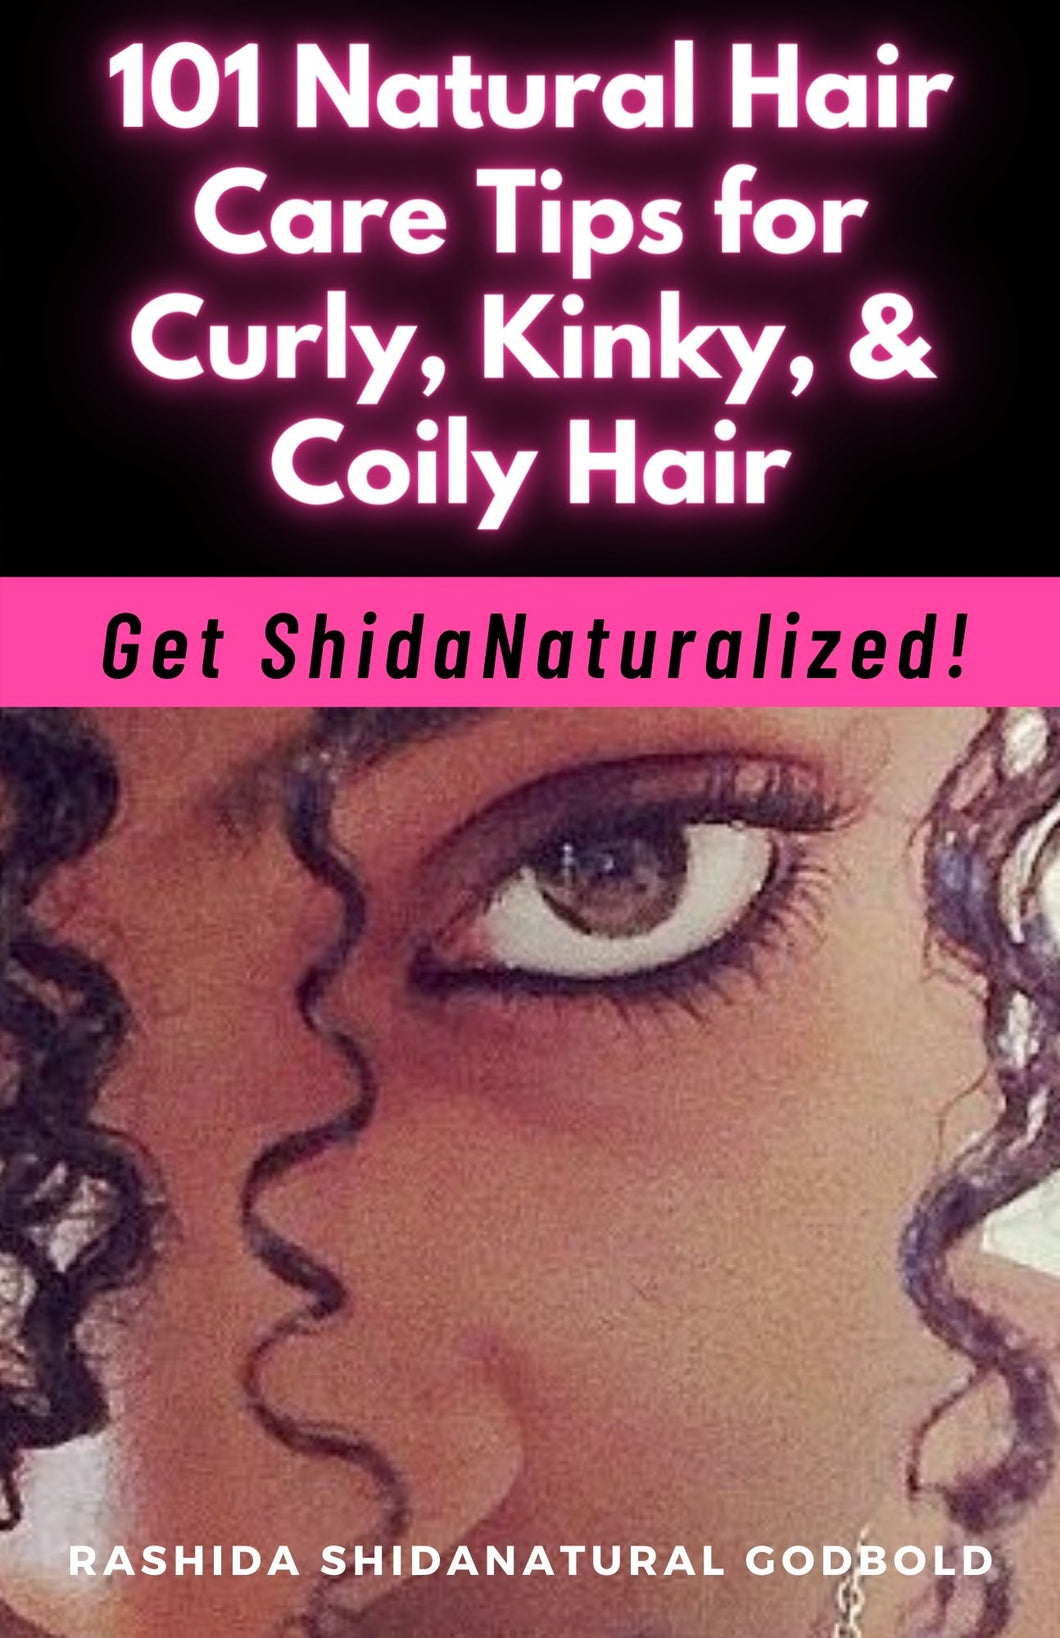 101 Natural Hair Care Tips for Curly, Kinky & Coily Hair - Get ShidaNaturalized!